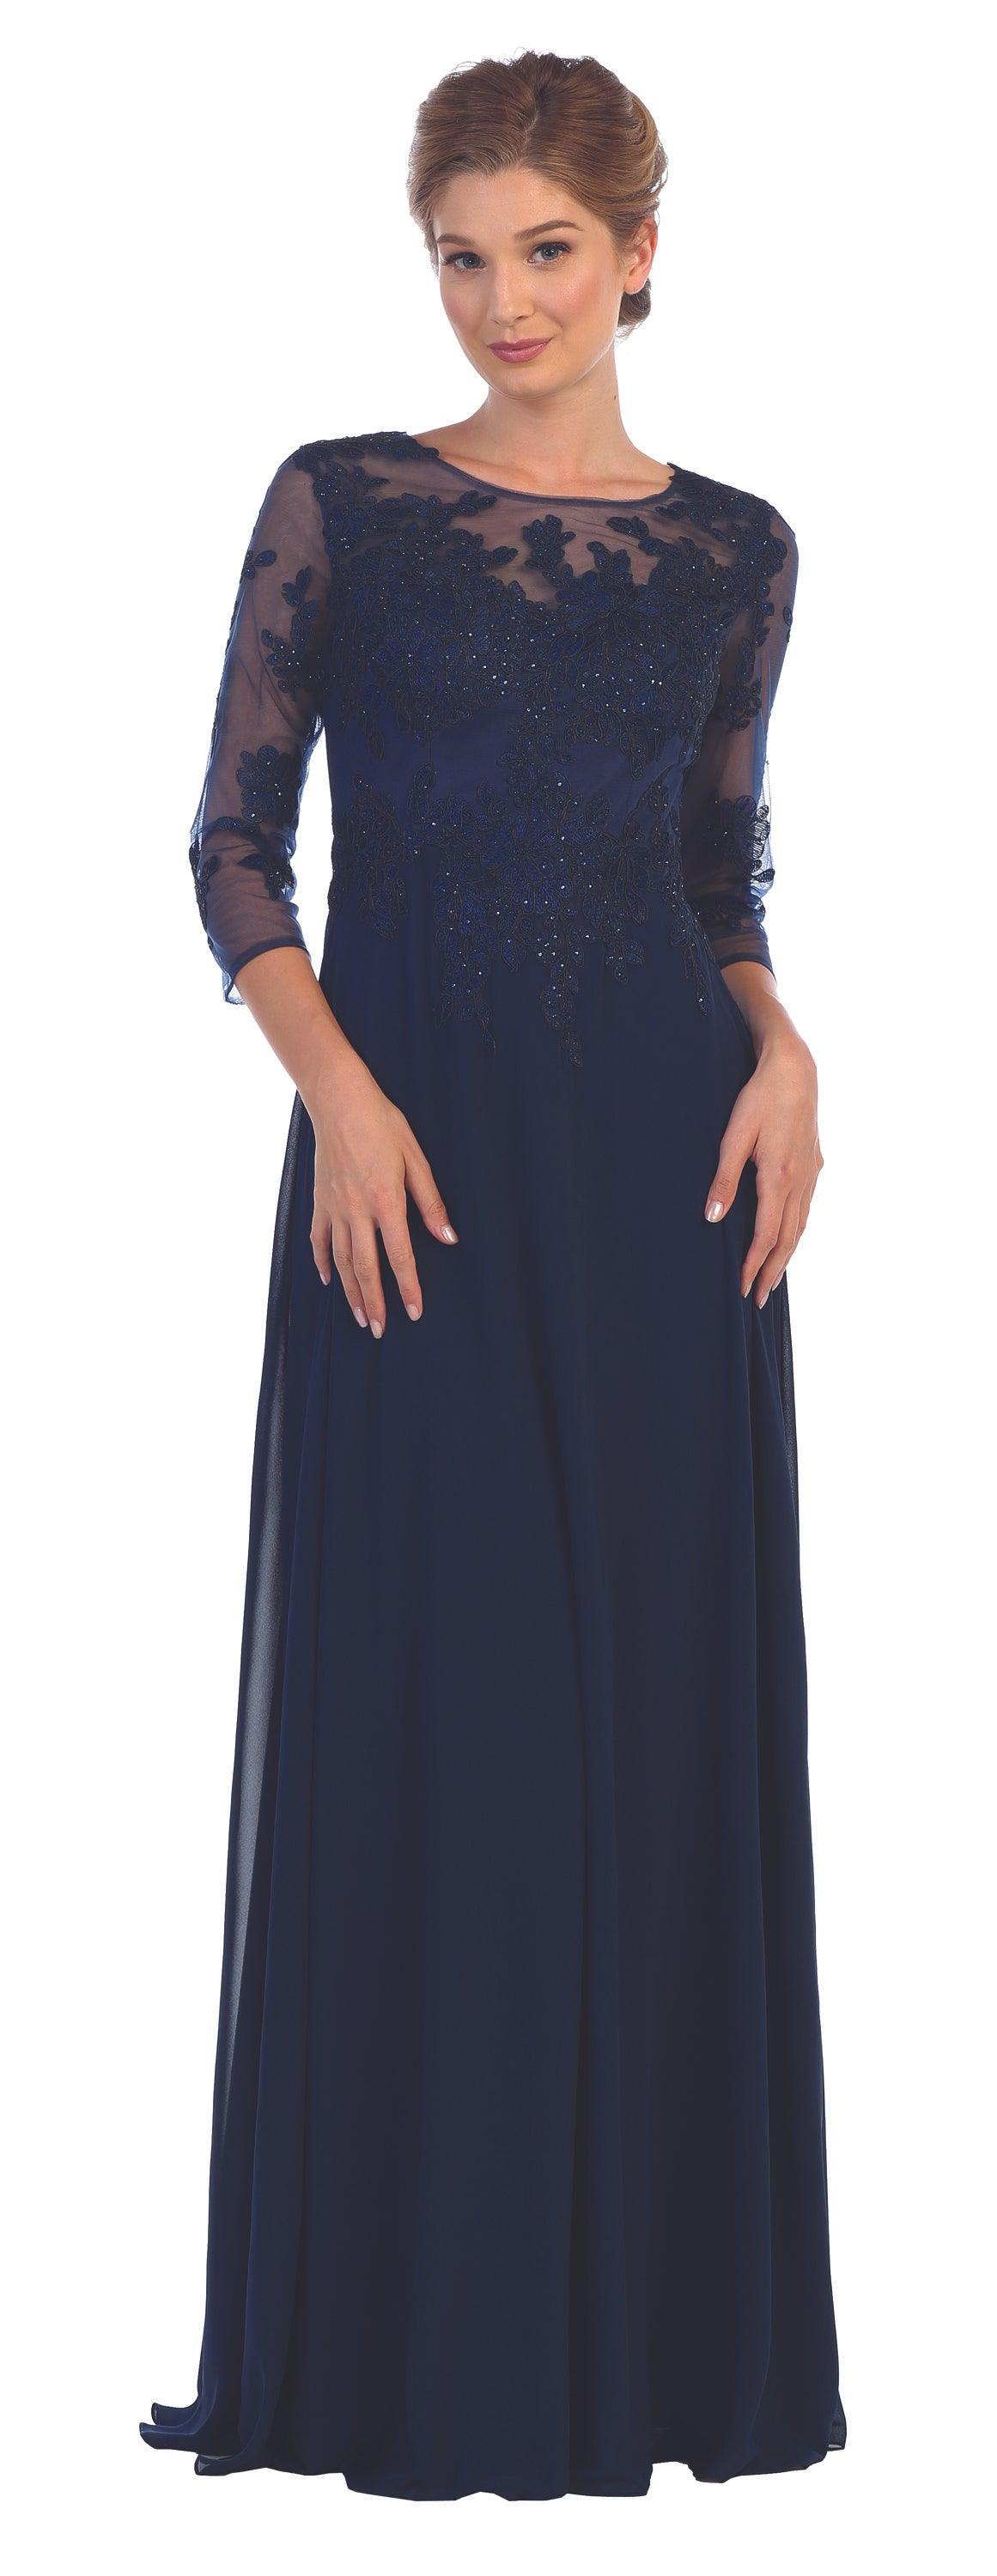 Long Mother of the Bride Formal Chiffon Dress Navy